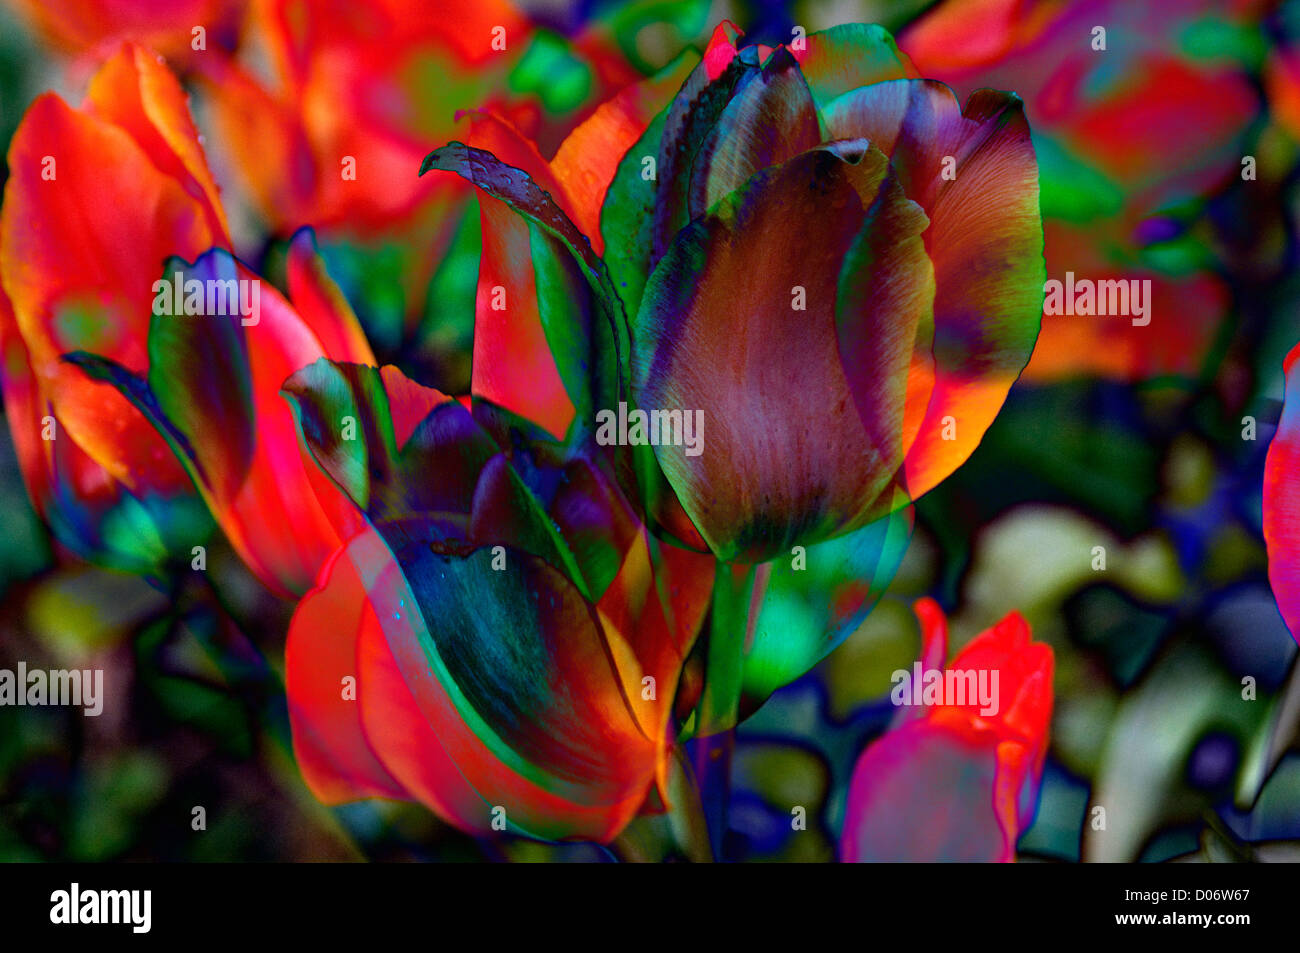 Red Tulips in a Digital Art Composite Image Stock Photo